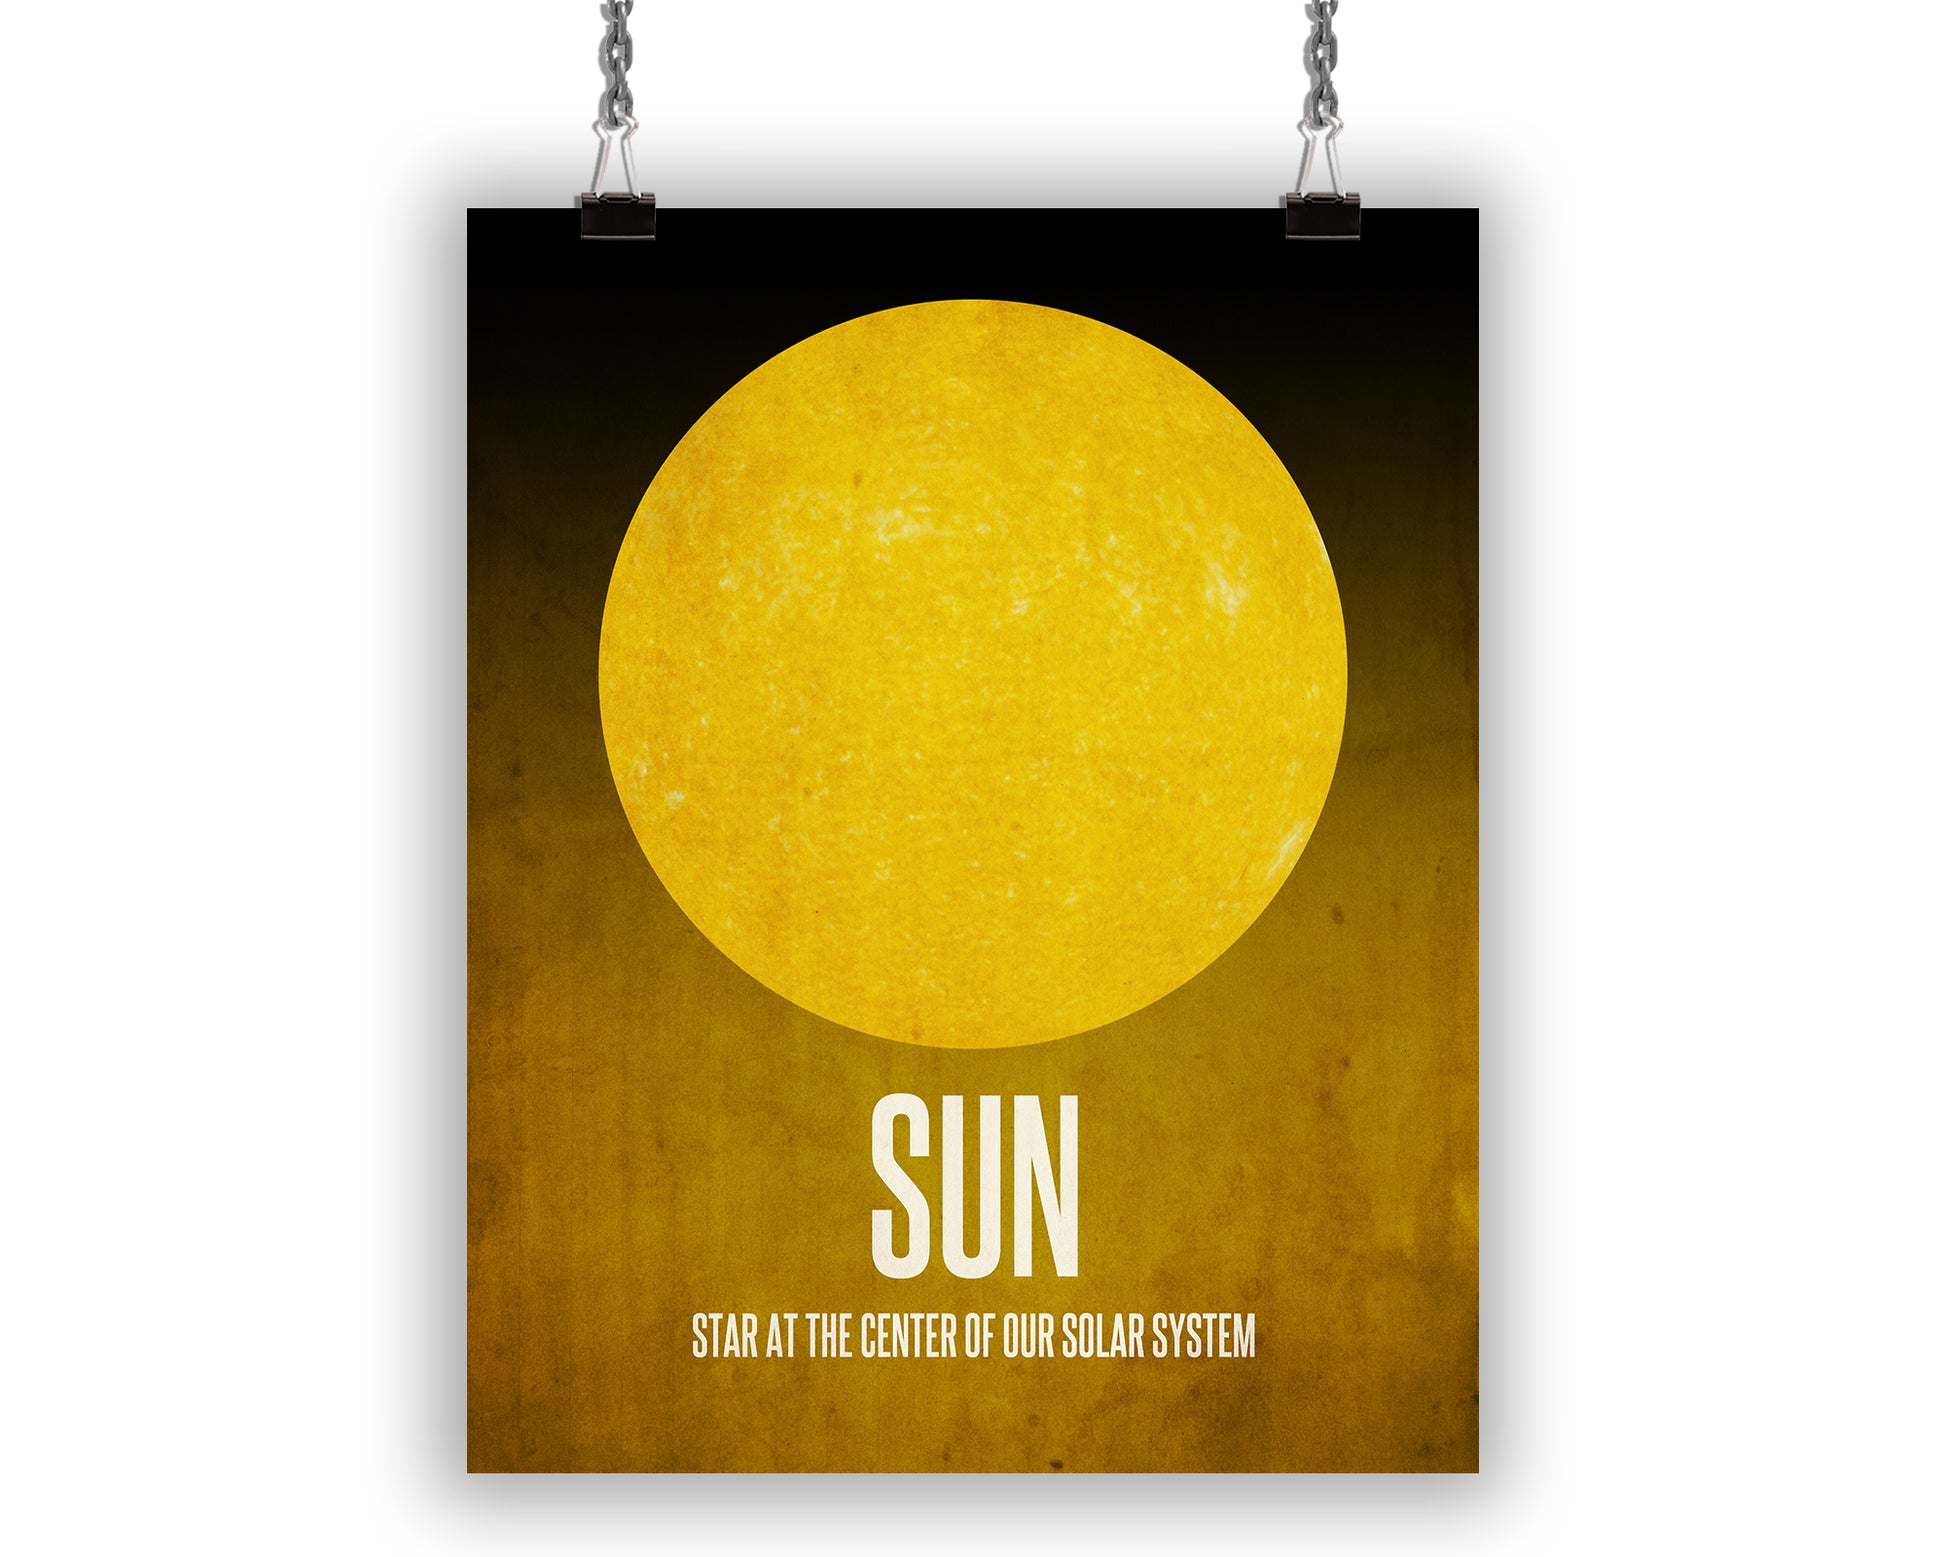 Art print with a minimalist image of the sun